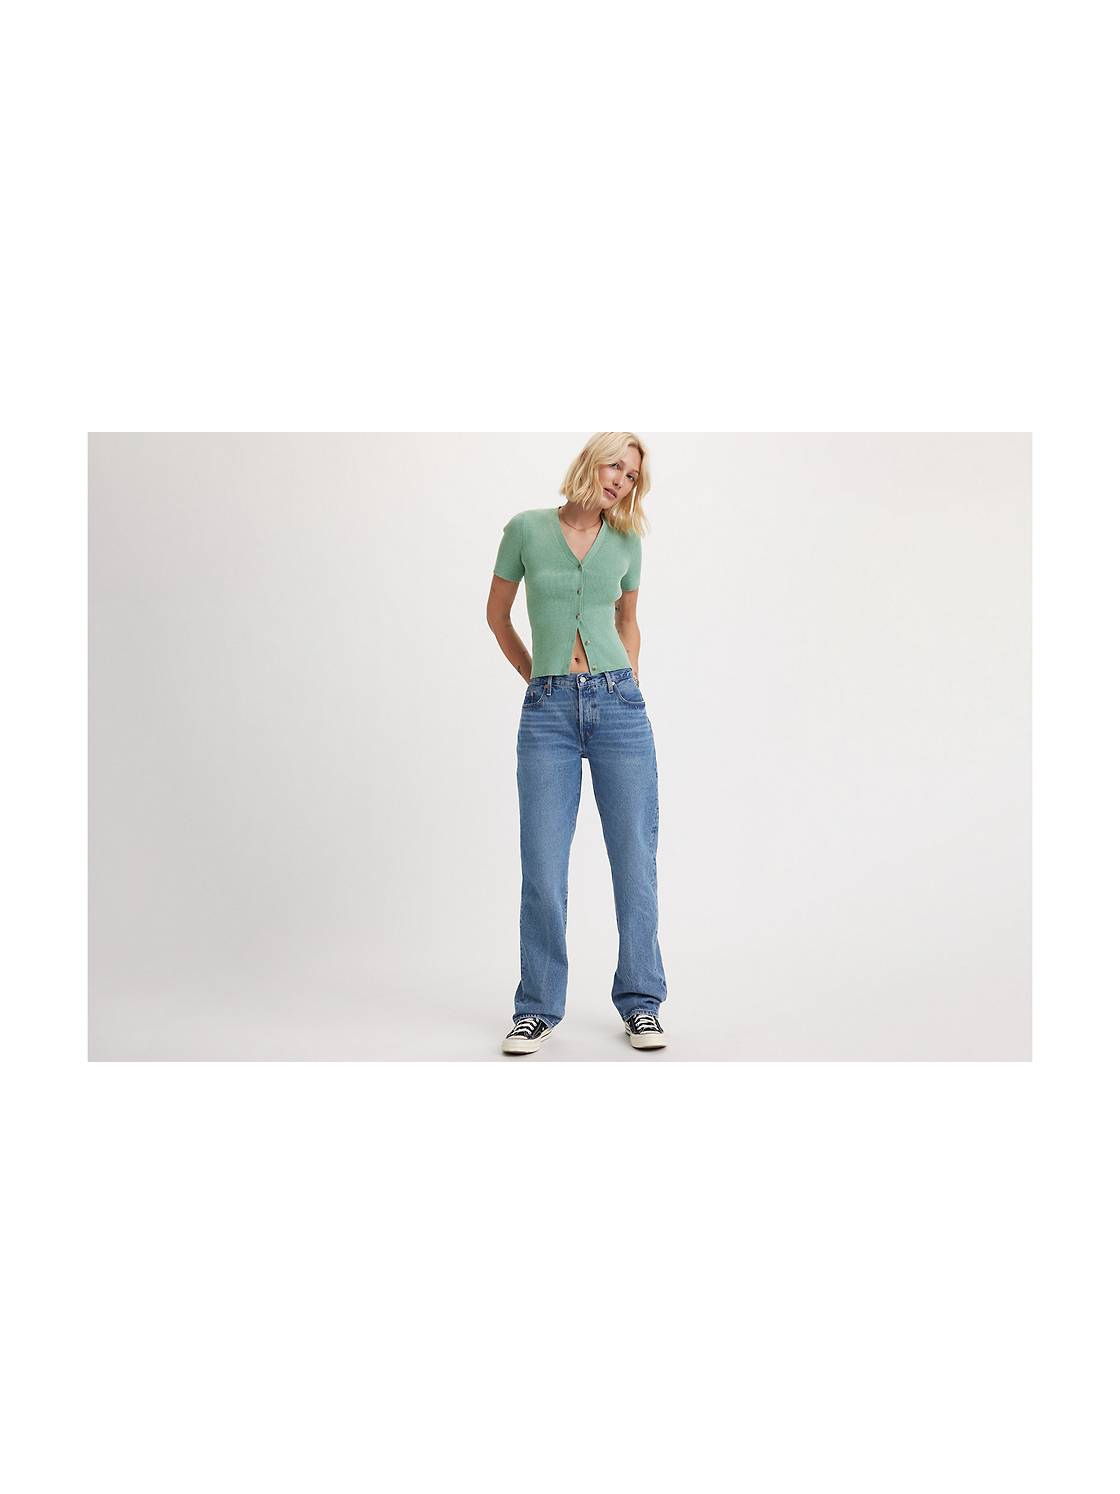 Signature by Levi Strauss & Co. Women's Mid Rise Capri Jeans